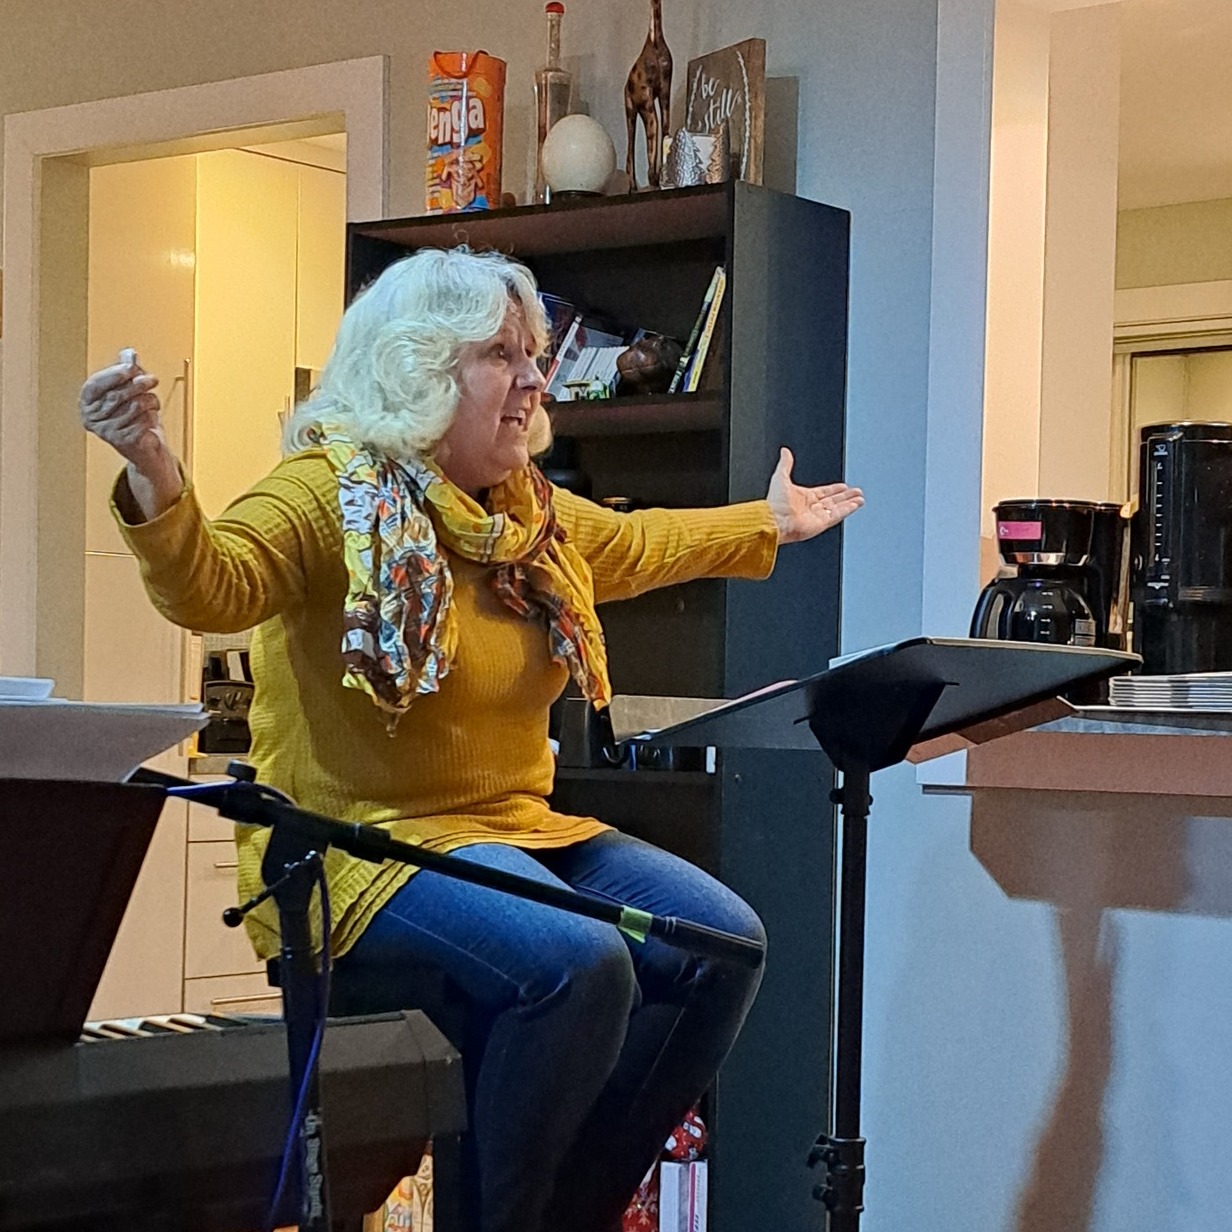 Deb teaches Nothing Hidden Ministry, at our Dwelling Place potluck. Taking thoughts captive, nailing them to the cross, and choosing God's thoughts and gifts about me. A powerful time transforming our minds to think more like God. Thank you Deb Wood 
.
.